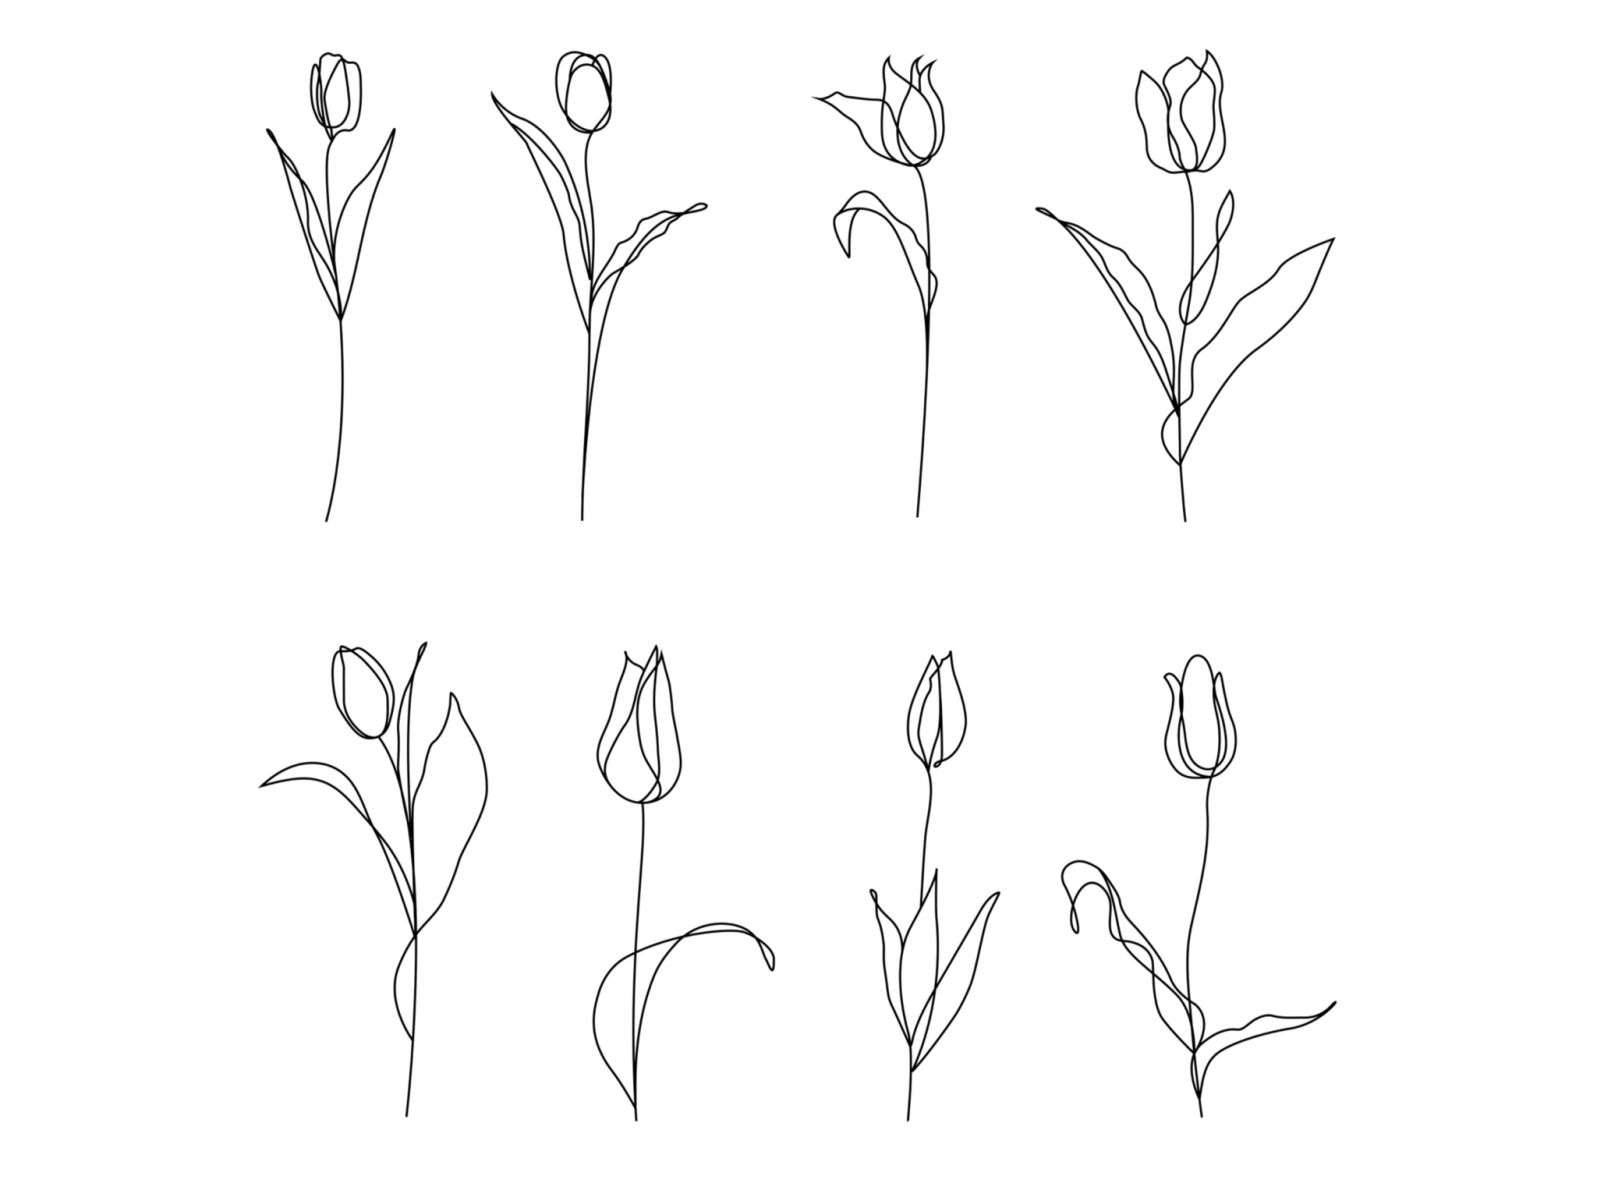 Outline tulip flowers icons set by Elena Nikol on Dribbble